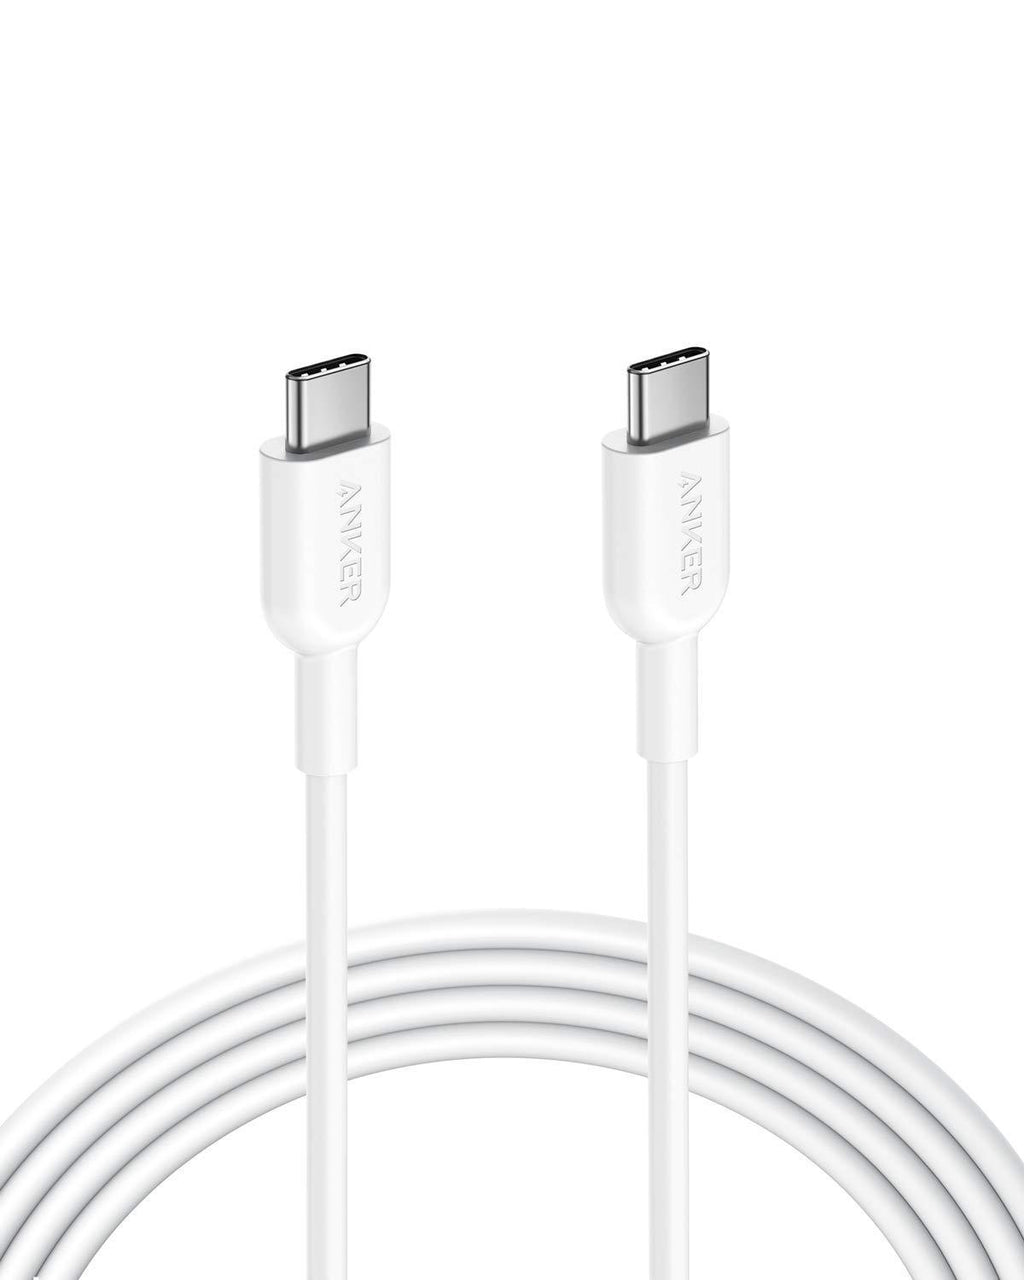 Anker USB C to USB C Cable, Powerline II USB-C to USB-C 2.0 Cord (6ft) USB-IF Certified, Power Delivery PD Charging for MacBook, Matebook, iPad Pro 2020, Chromebook, Switch, and More(White) 6ft white - LeoForward Australia